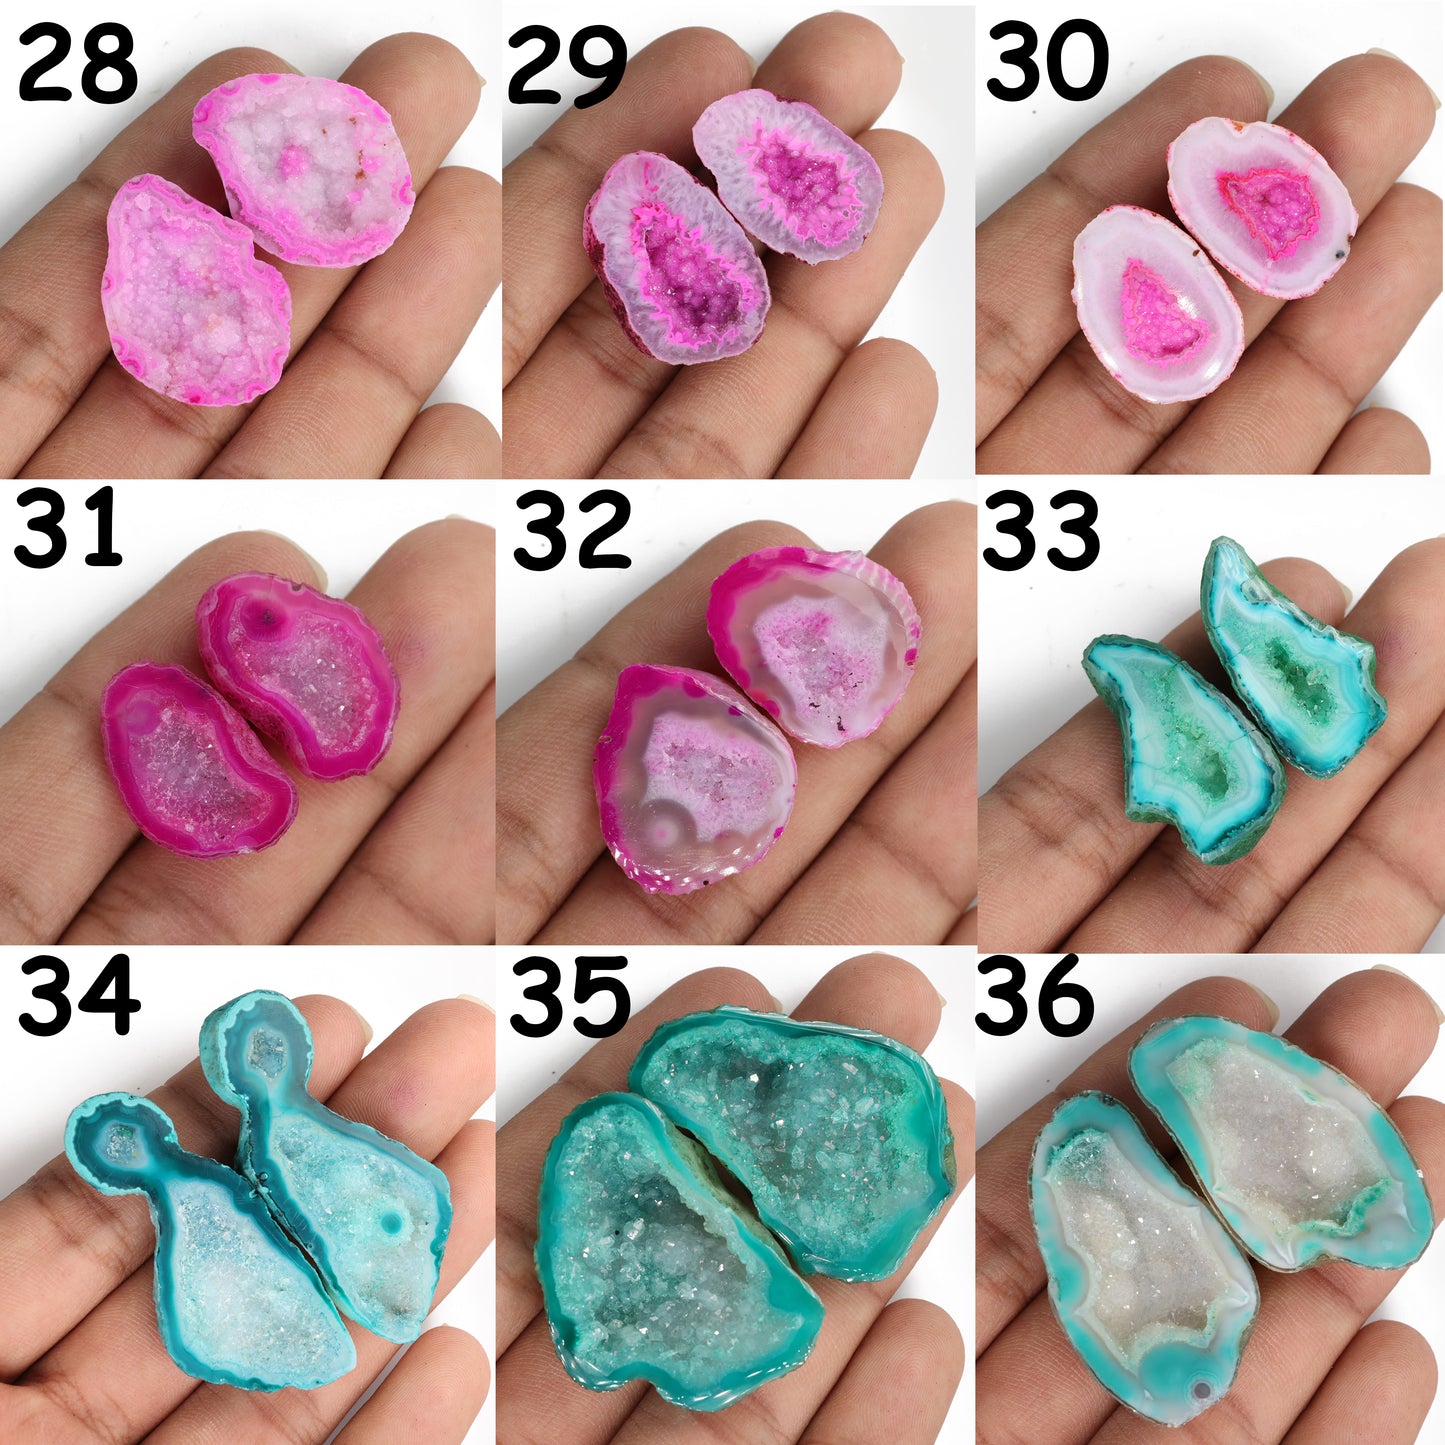 Geode druzy pair stone mix color for customize ***You can Order Exact Piece as in Photos***